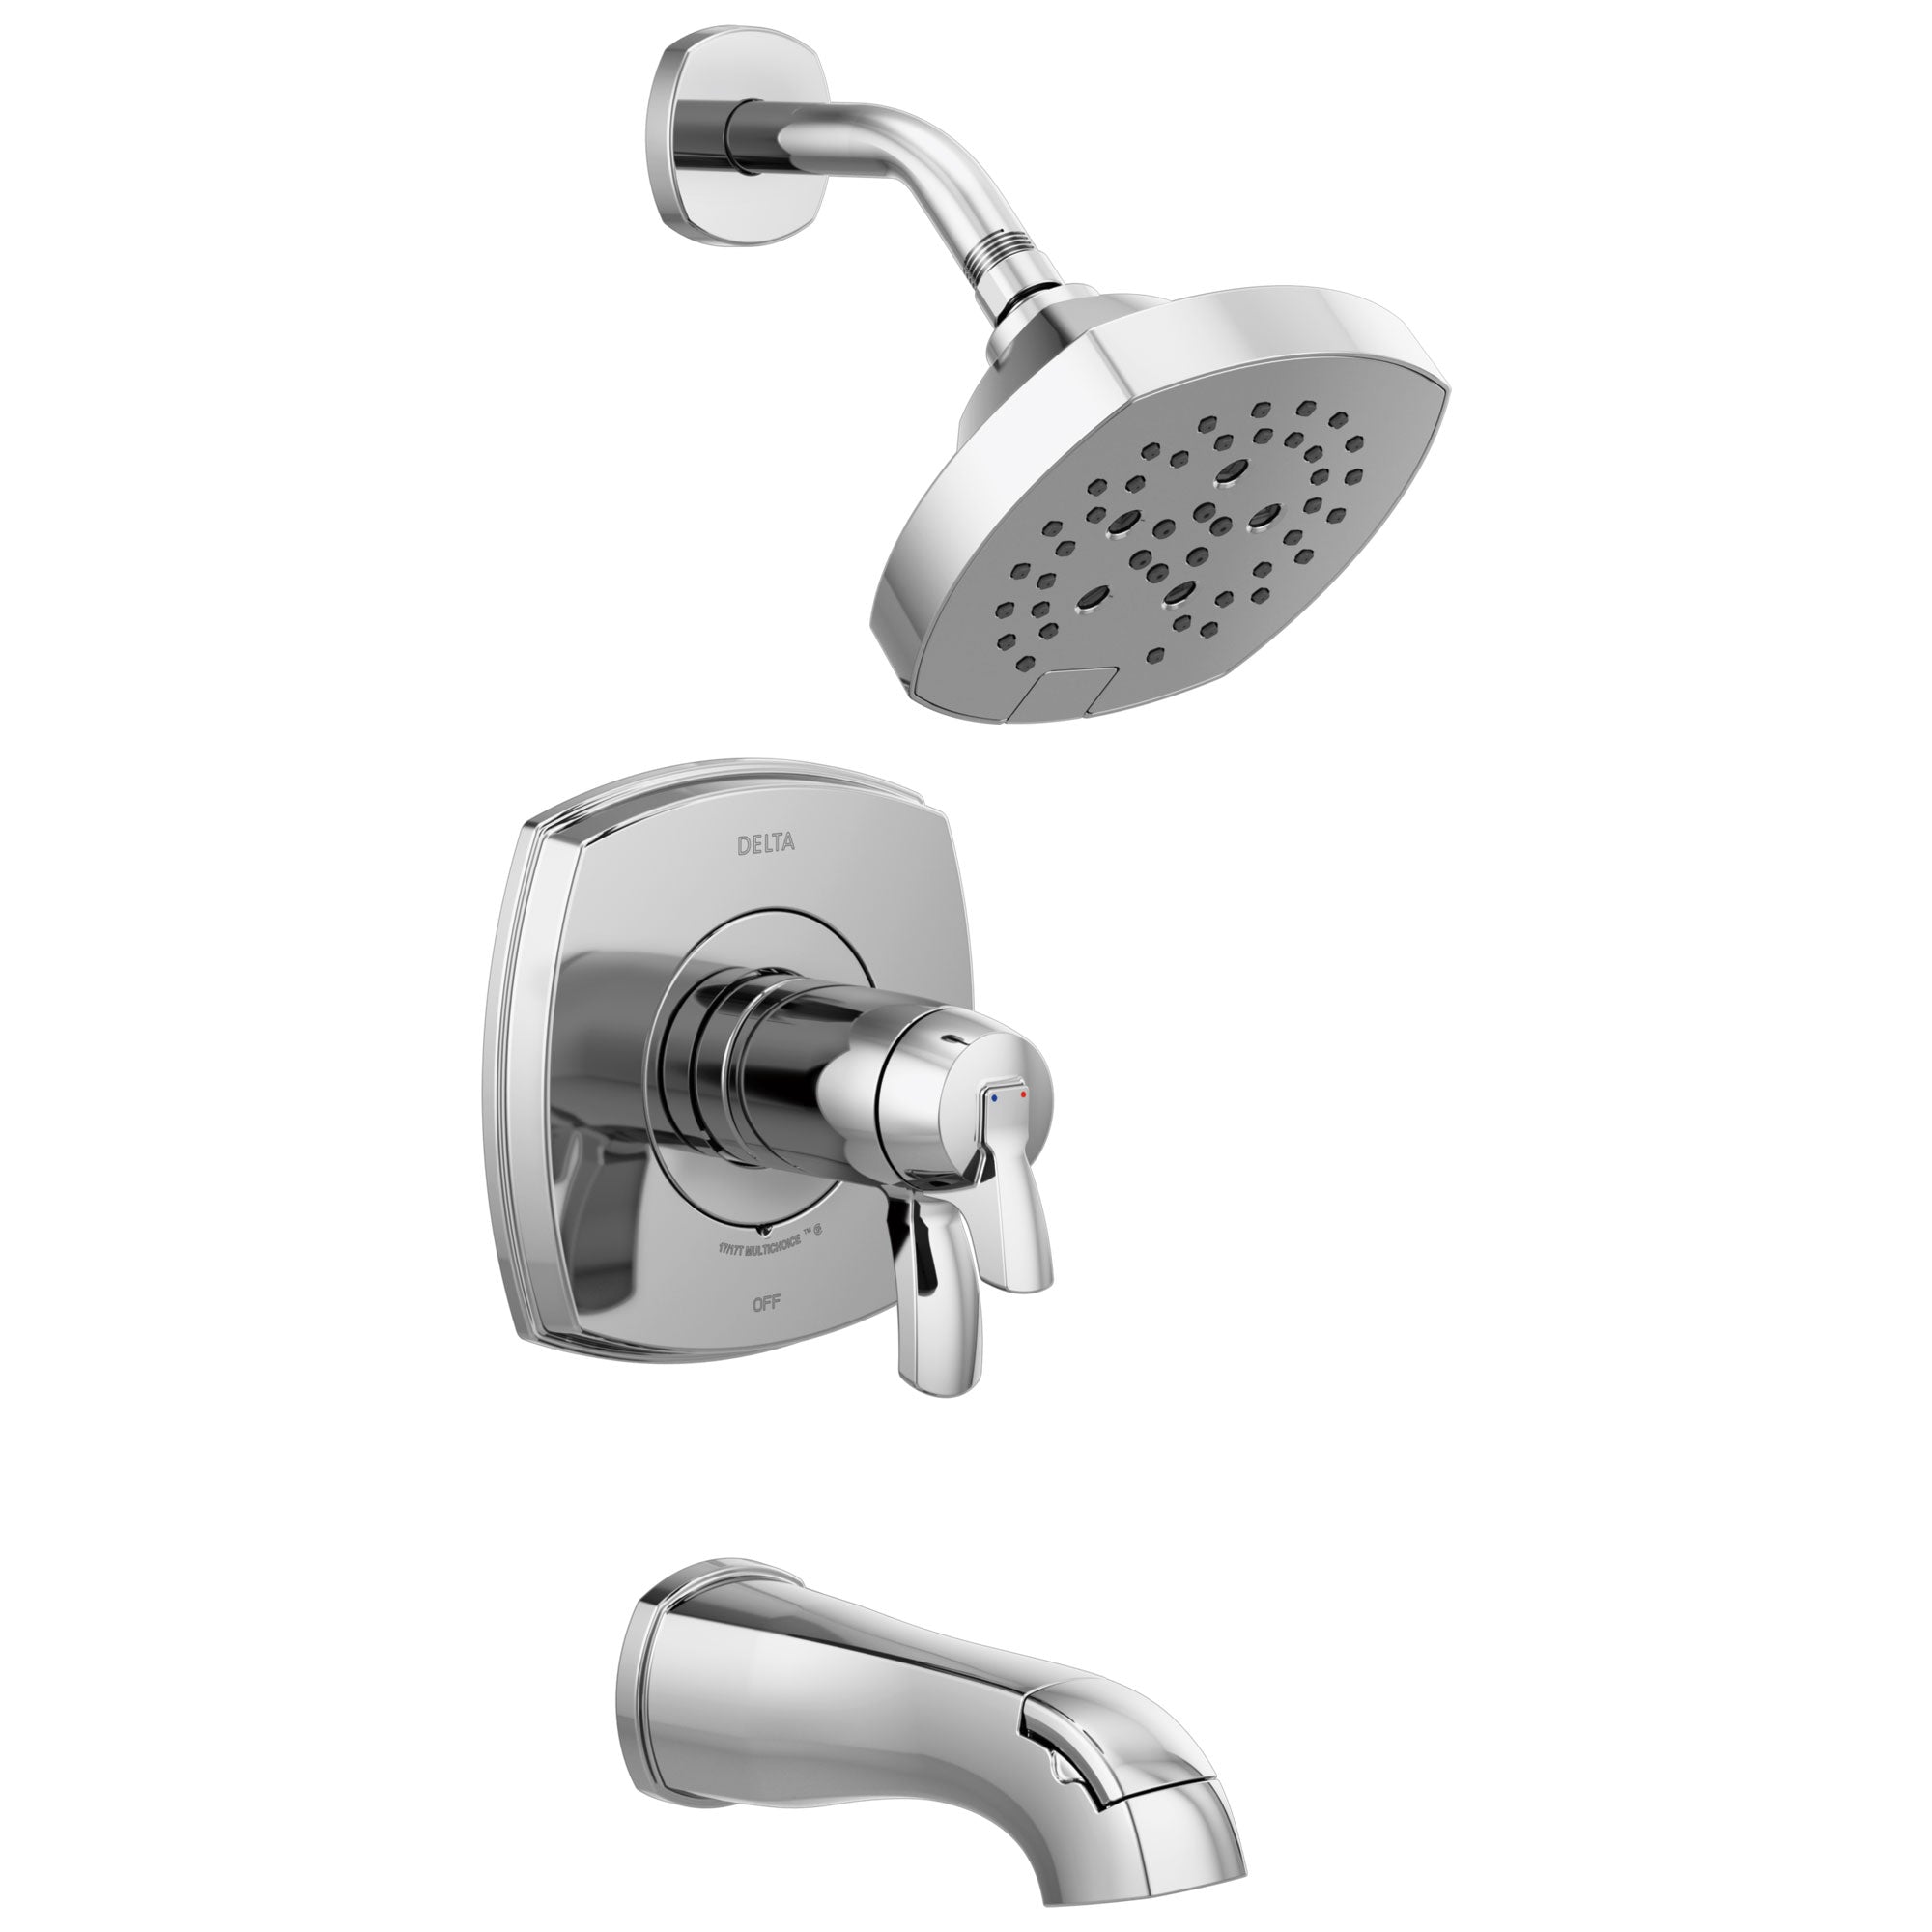 Delta Stryke Chrome Finish 17T Thermostatic Tub and Shower Faucet Combination Includes Handles, Cartridge, and Valve with Stops D3234V